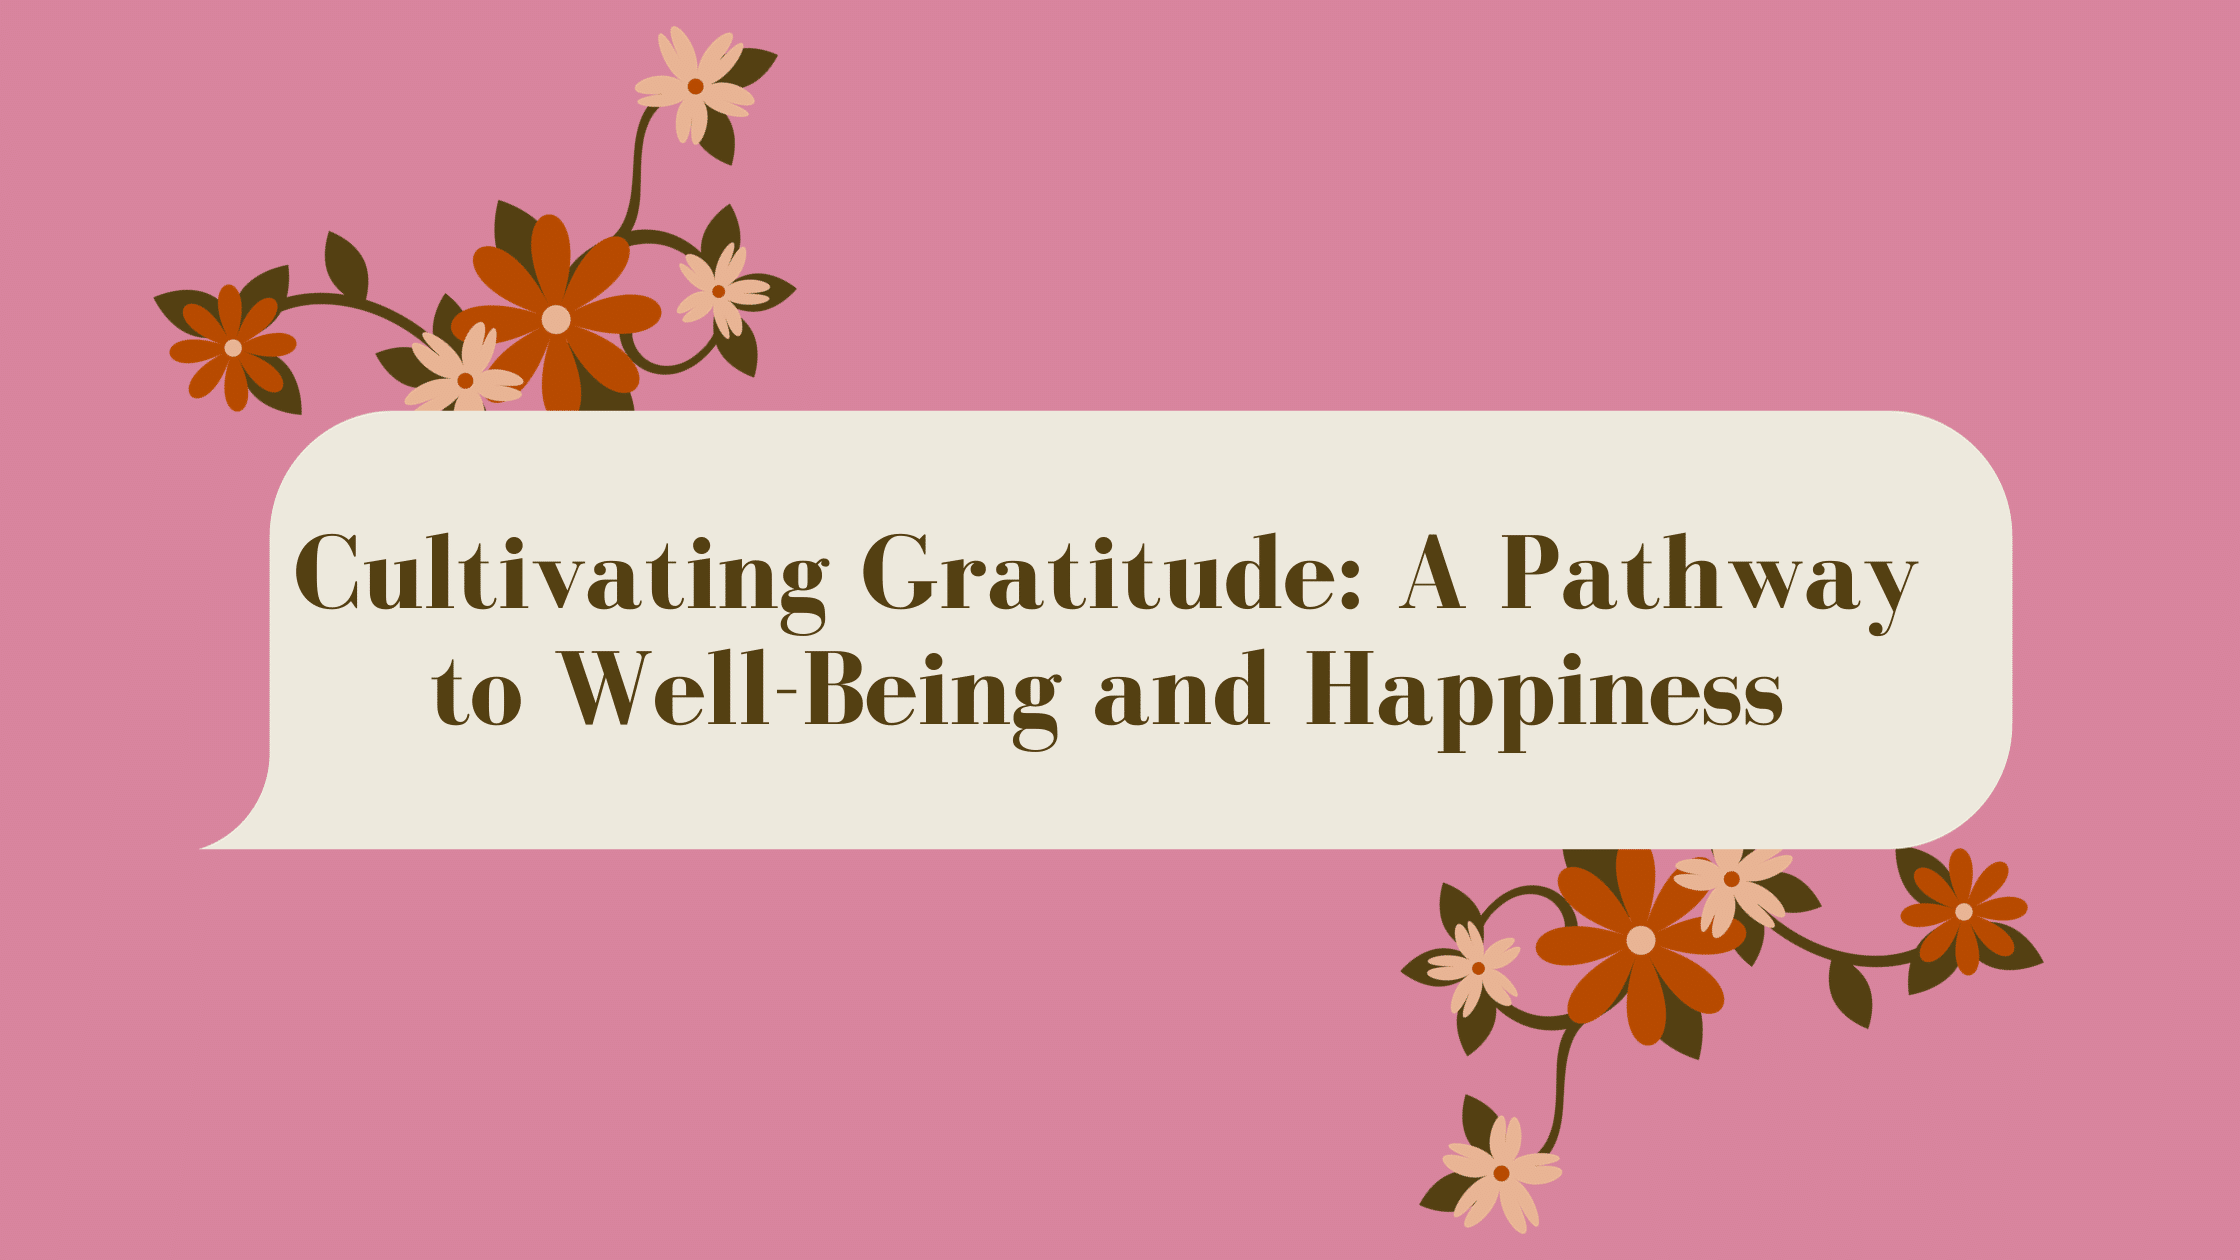 Cultivating Gratitude: A Pathway to Well-Being and Happiness